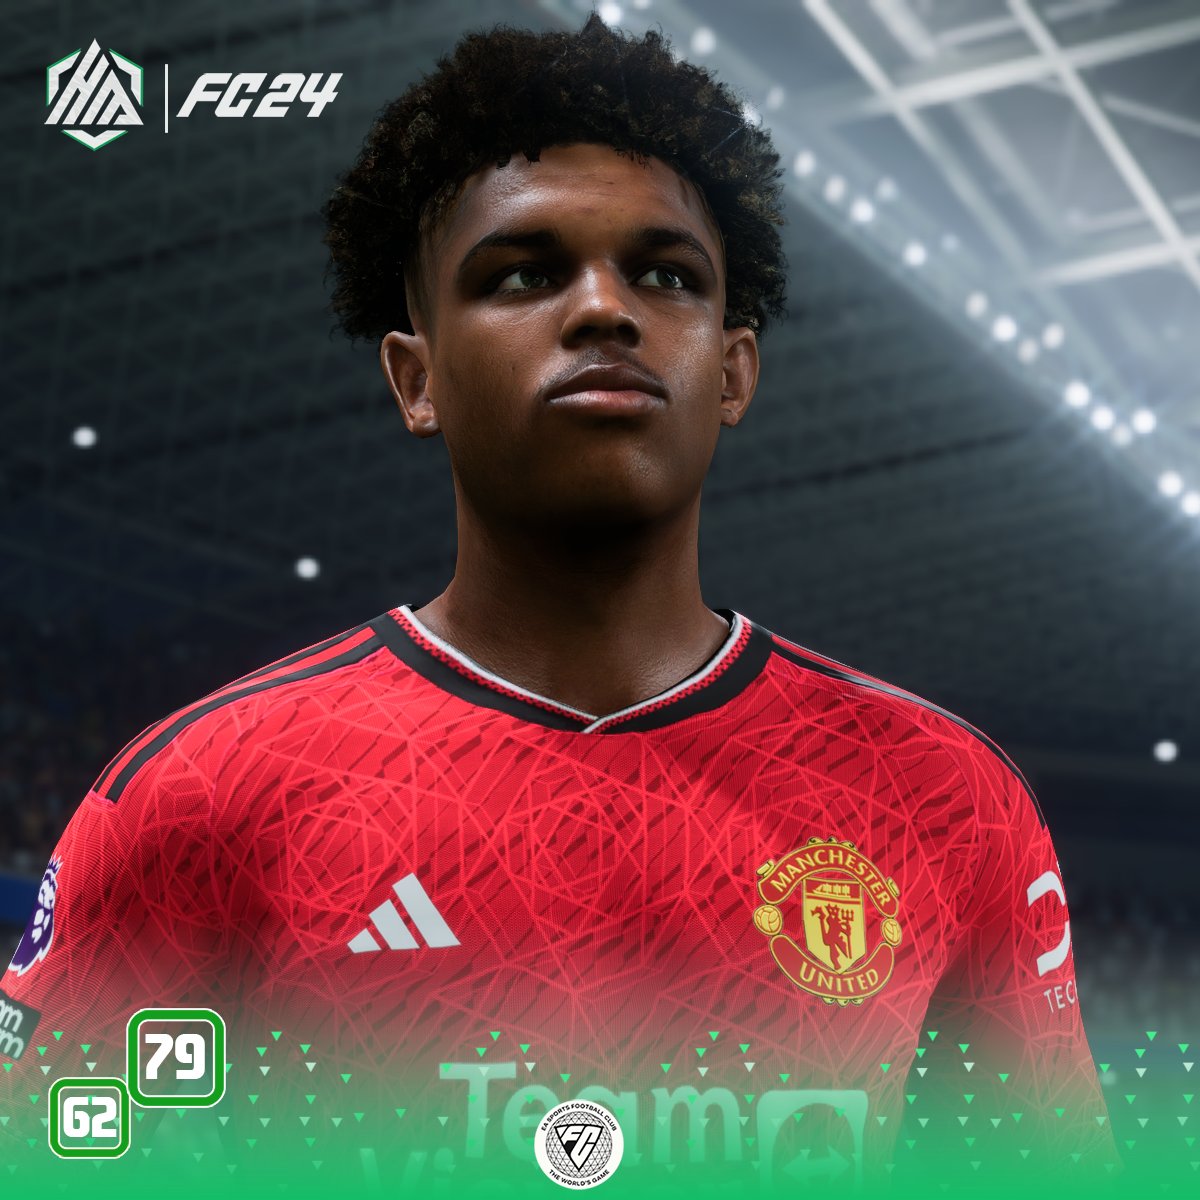 🌟His Talent is exciting, a Hidden Gems !! 19 years with Good Potential in #FC24🤩  

Shola Shoretire #ManchesterUnited 's Gem 💎

Release : Today ✅🤙 

#EAFC24 #PremierLeague #RedDevils #ManchesterDerbyWeek #ManchesterisRed